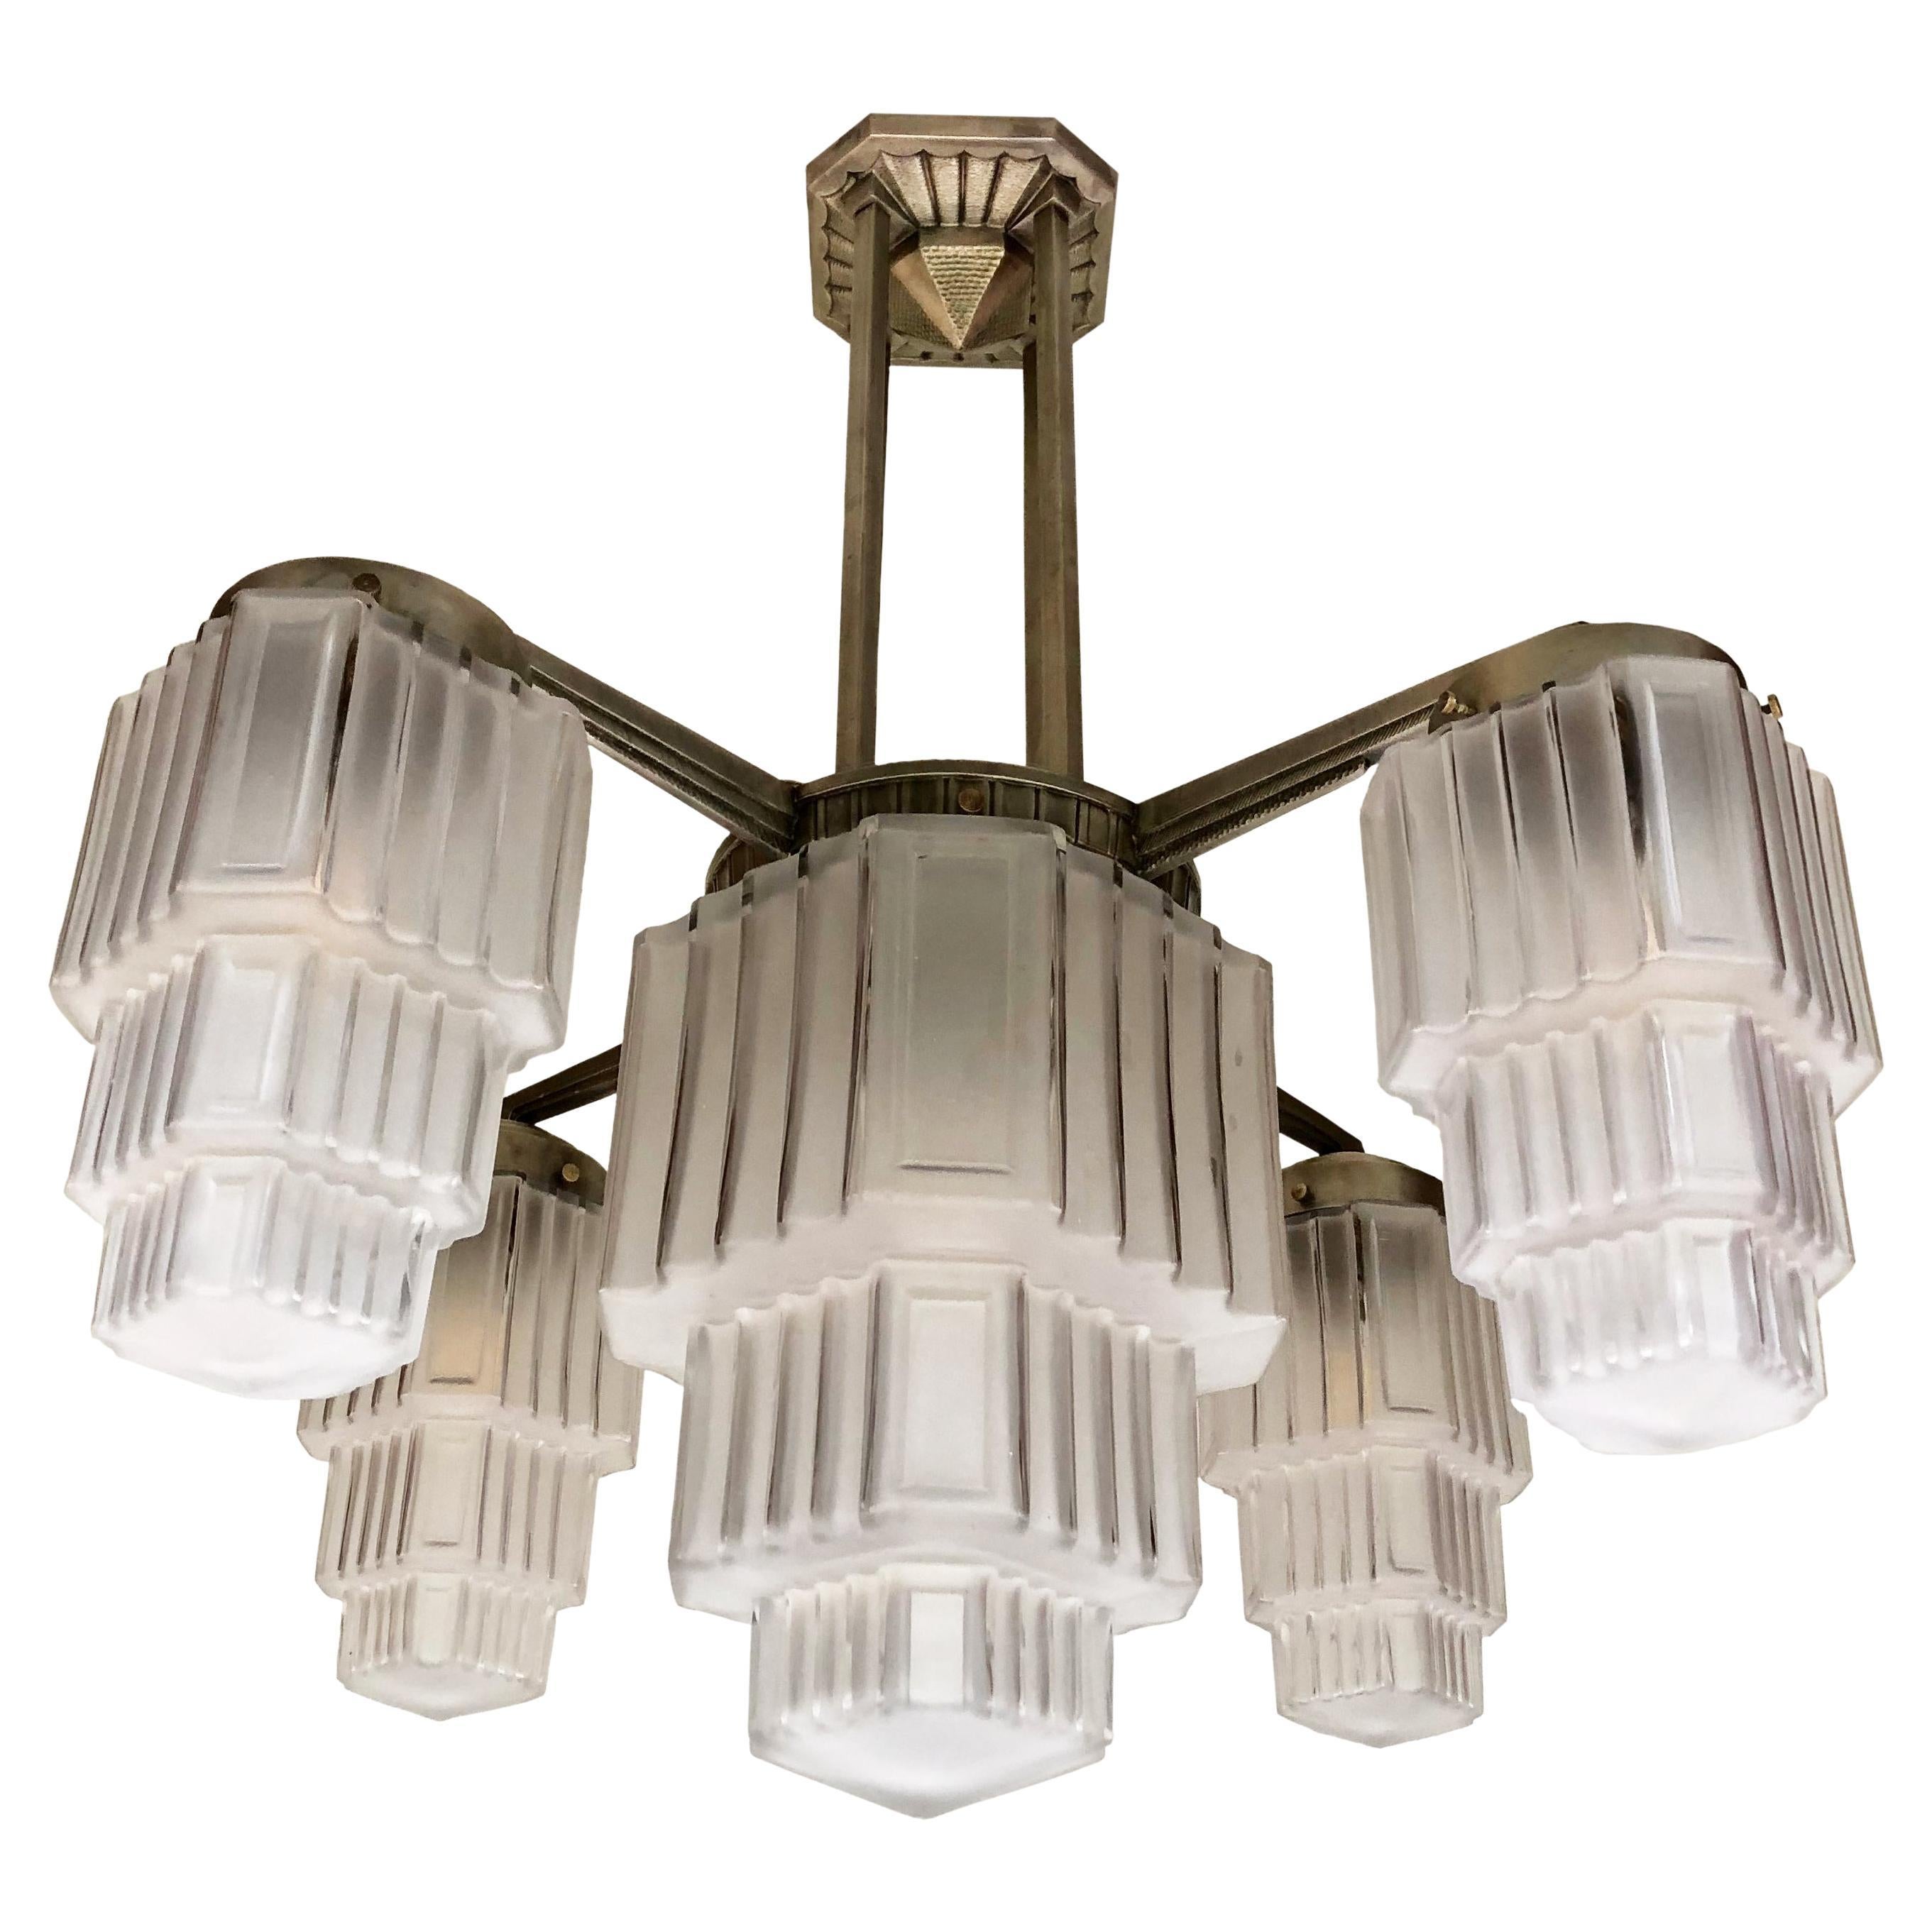 Skyscraper Art Deco Chandelier Attributed to Héttier and Vincent For Sale